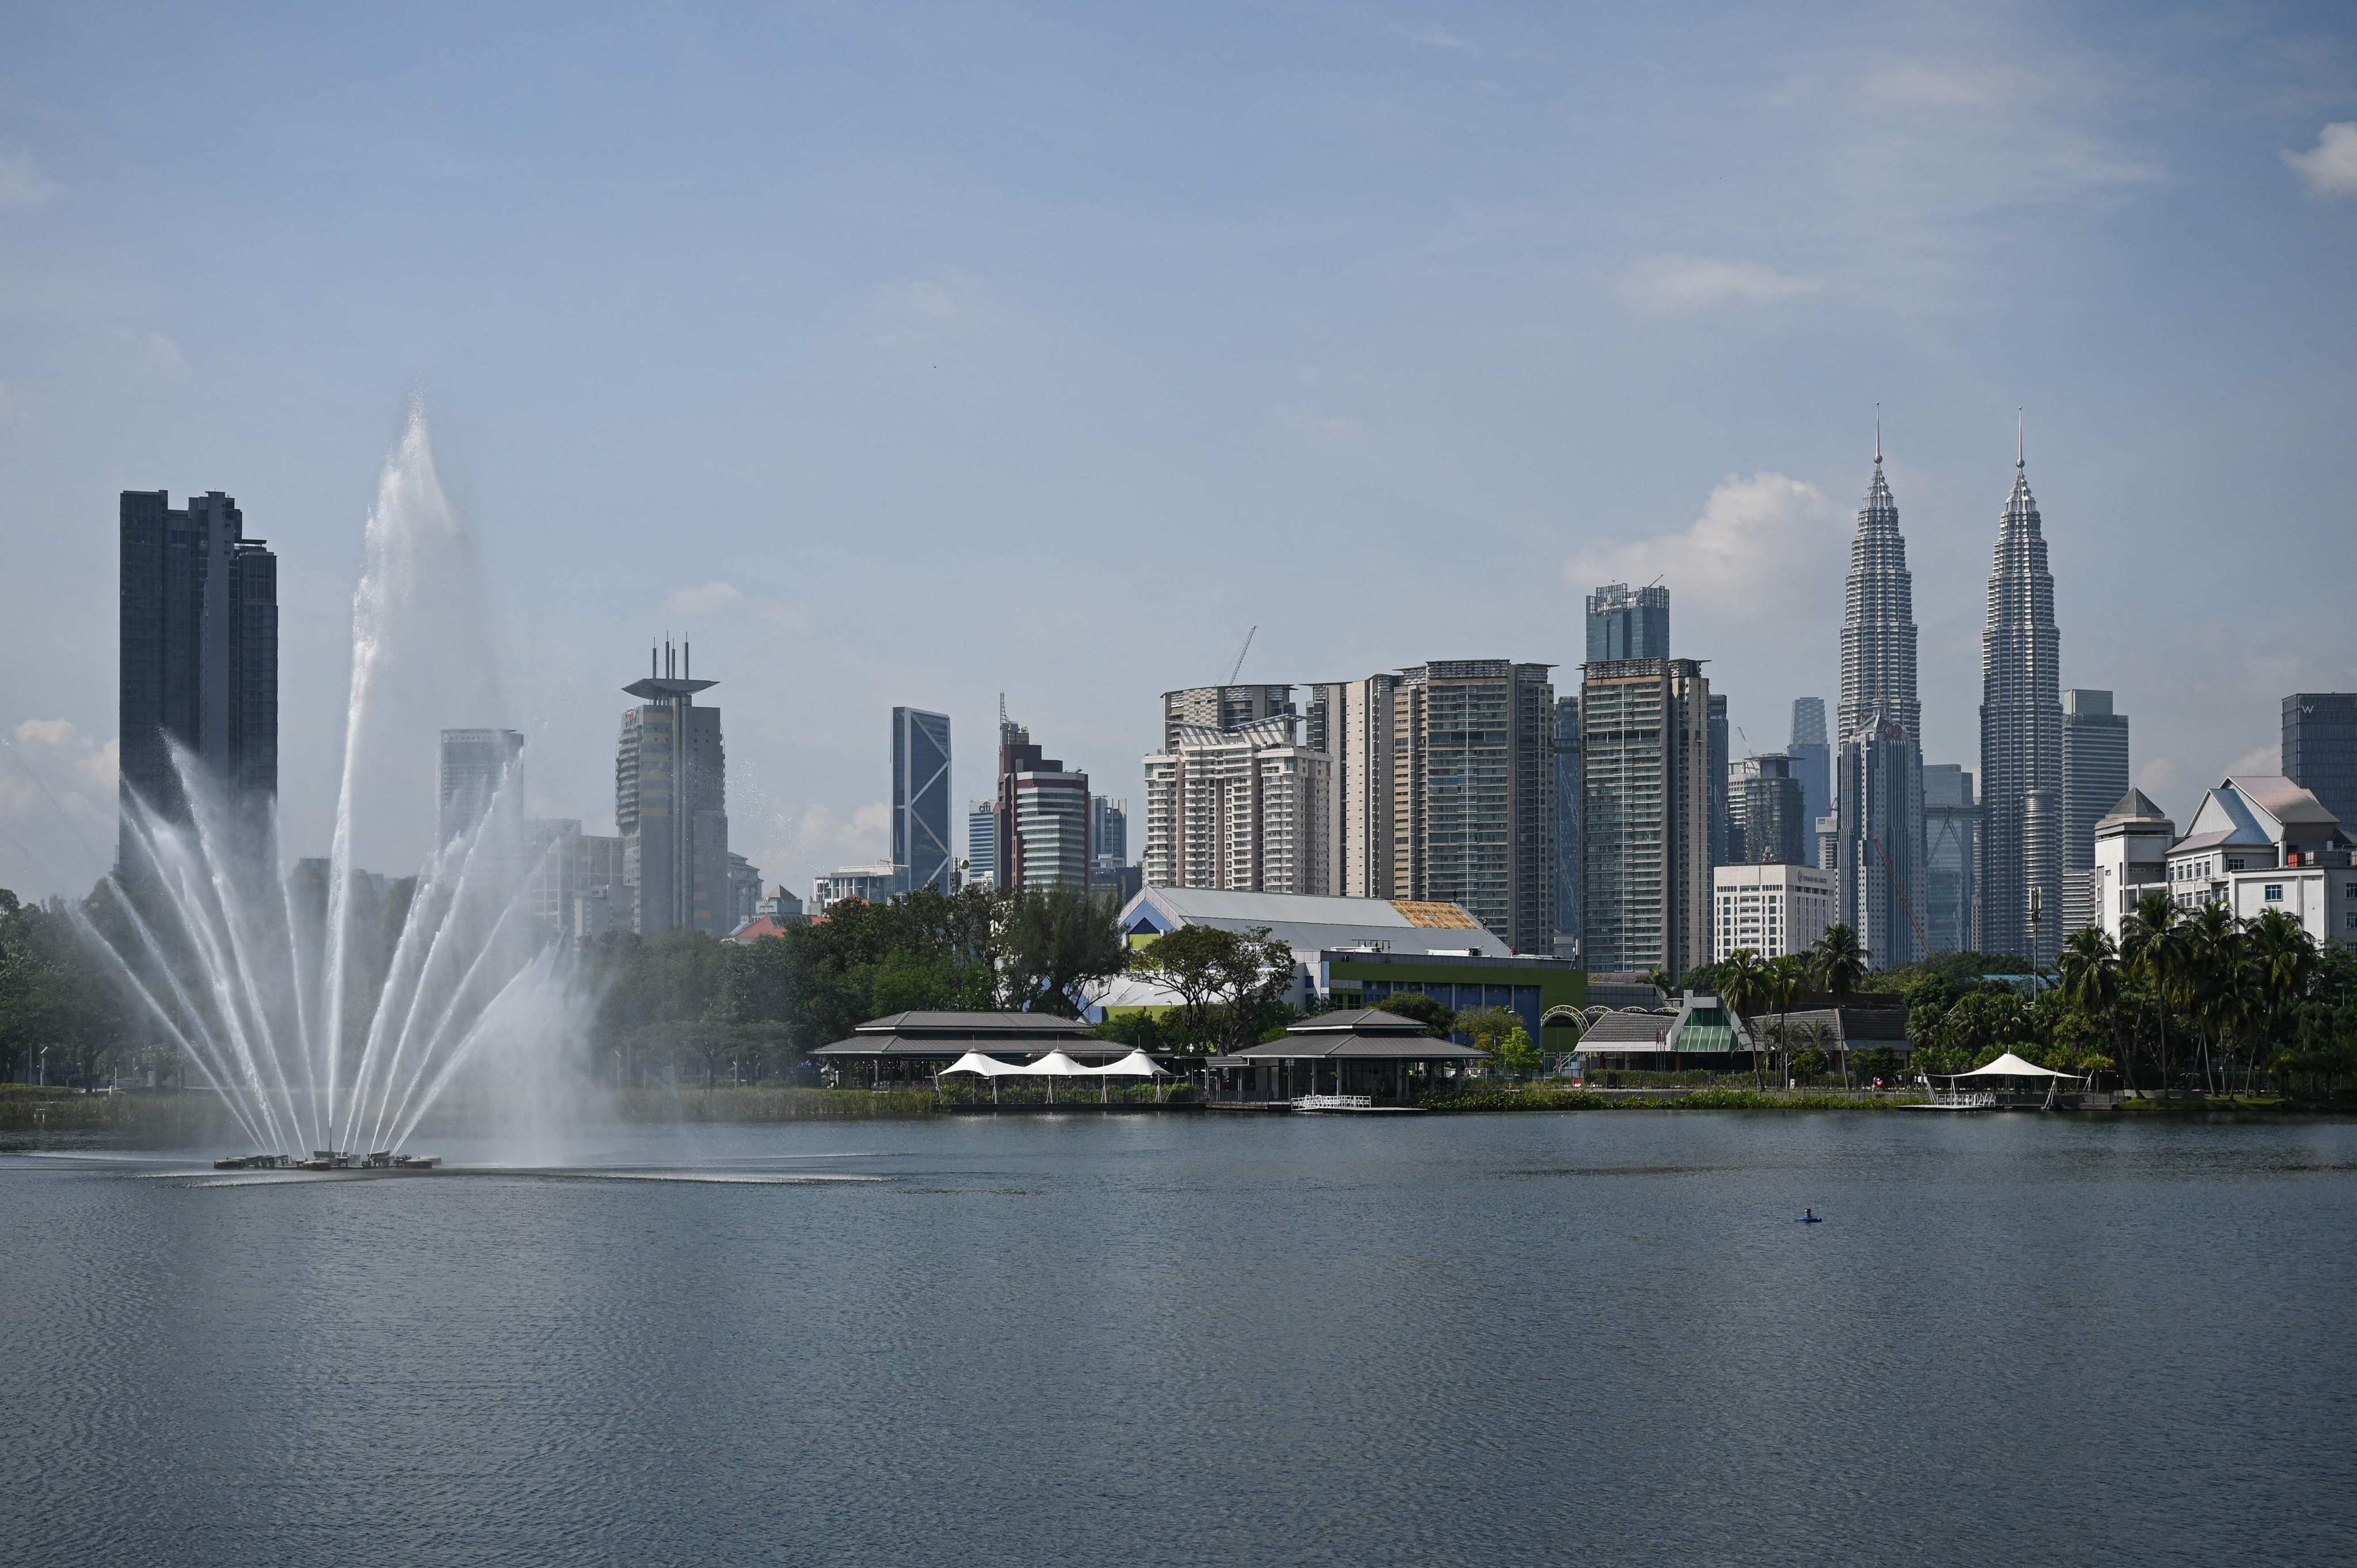 Malaysia’s landmark Petronas Twin Towers (right) and other commercial buildings in Kuala Lumpur. The high-speed rail link aimed to provide a 90-minute direct rail connection between Kuala Lumpur and Singapore. Photo: AFP